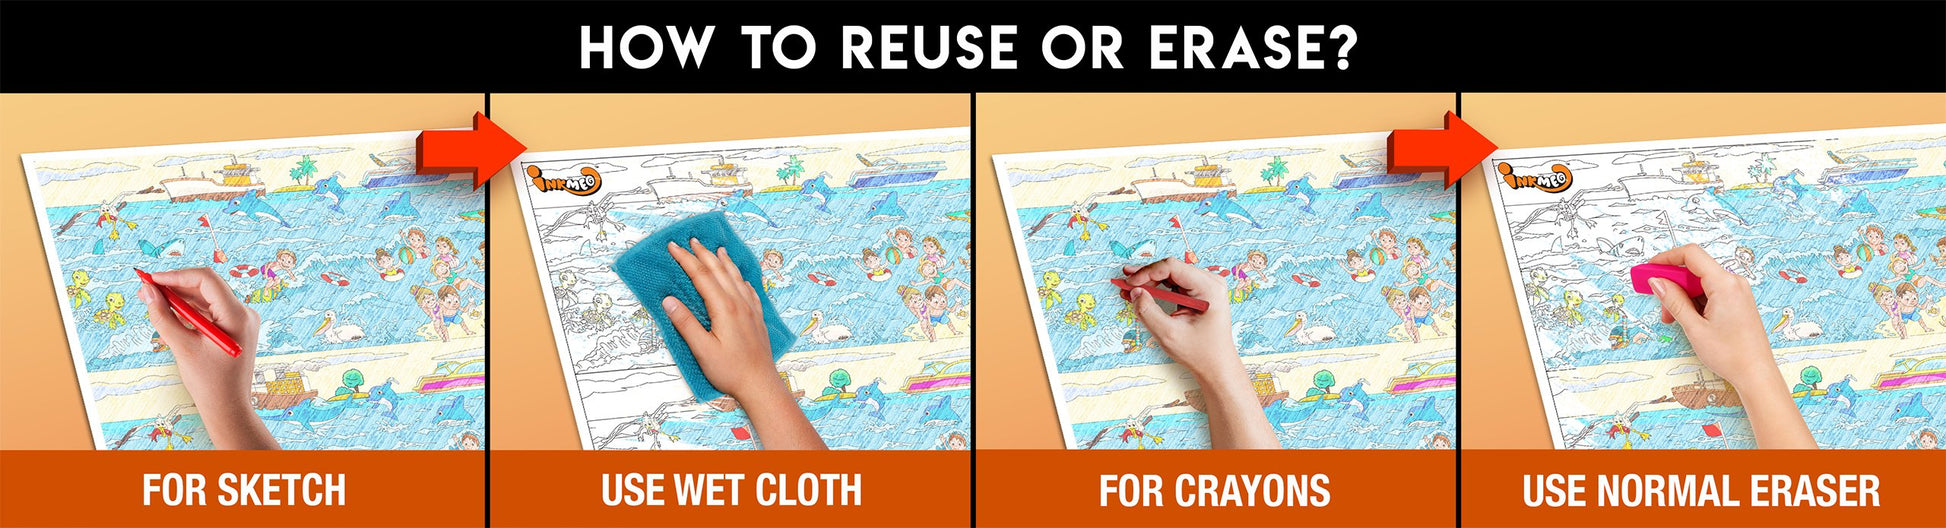 The image has a orange background with four pictures demonstrating how to reuse or erase: the first picture depicts sketching on the sheet, the second shows using a wet cloth to remove sketches, the third image displays crayons coloring on the sheet, and the fourth image illustrates erasing crayons with a regular eraser.